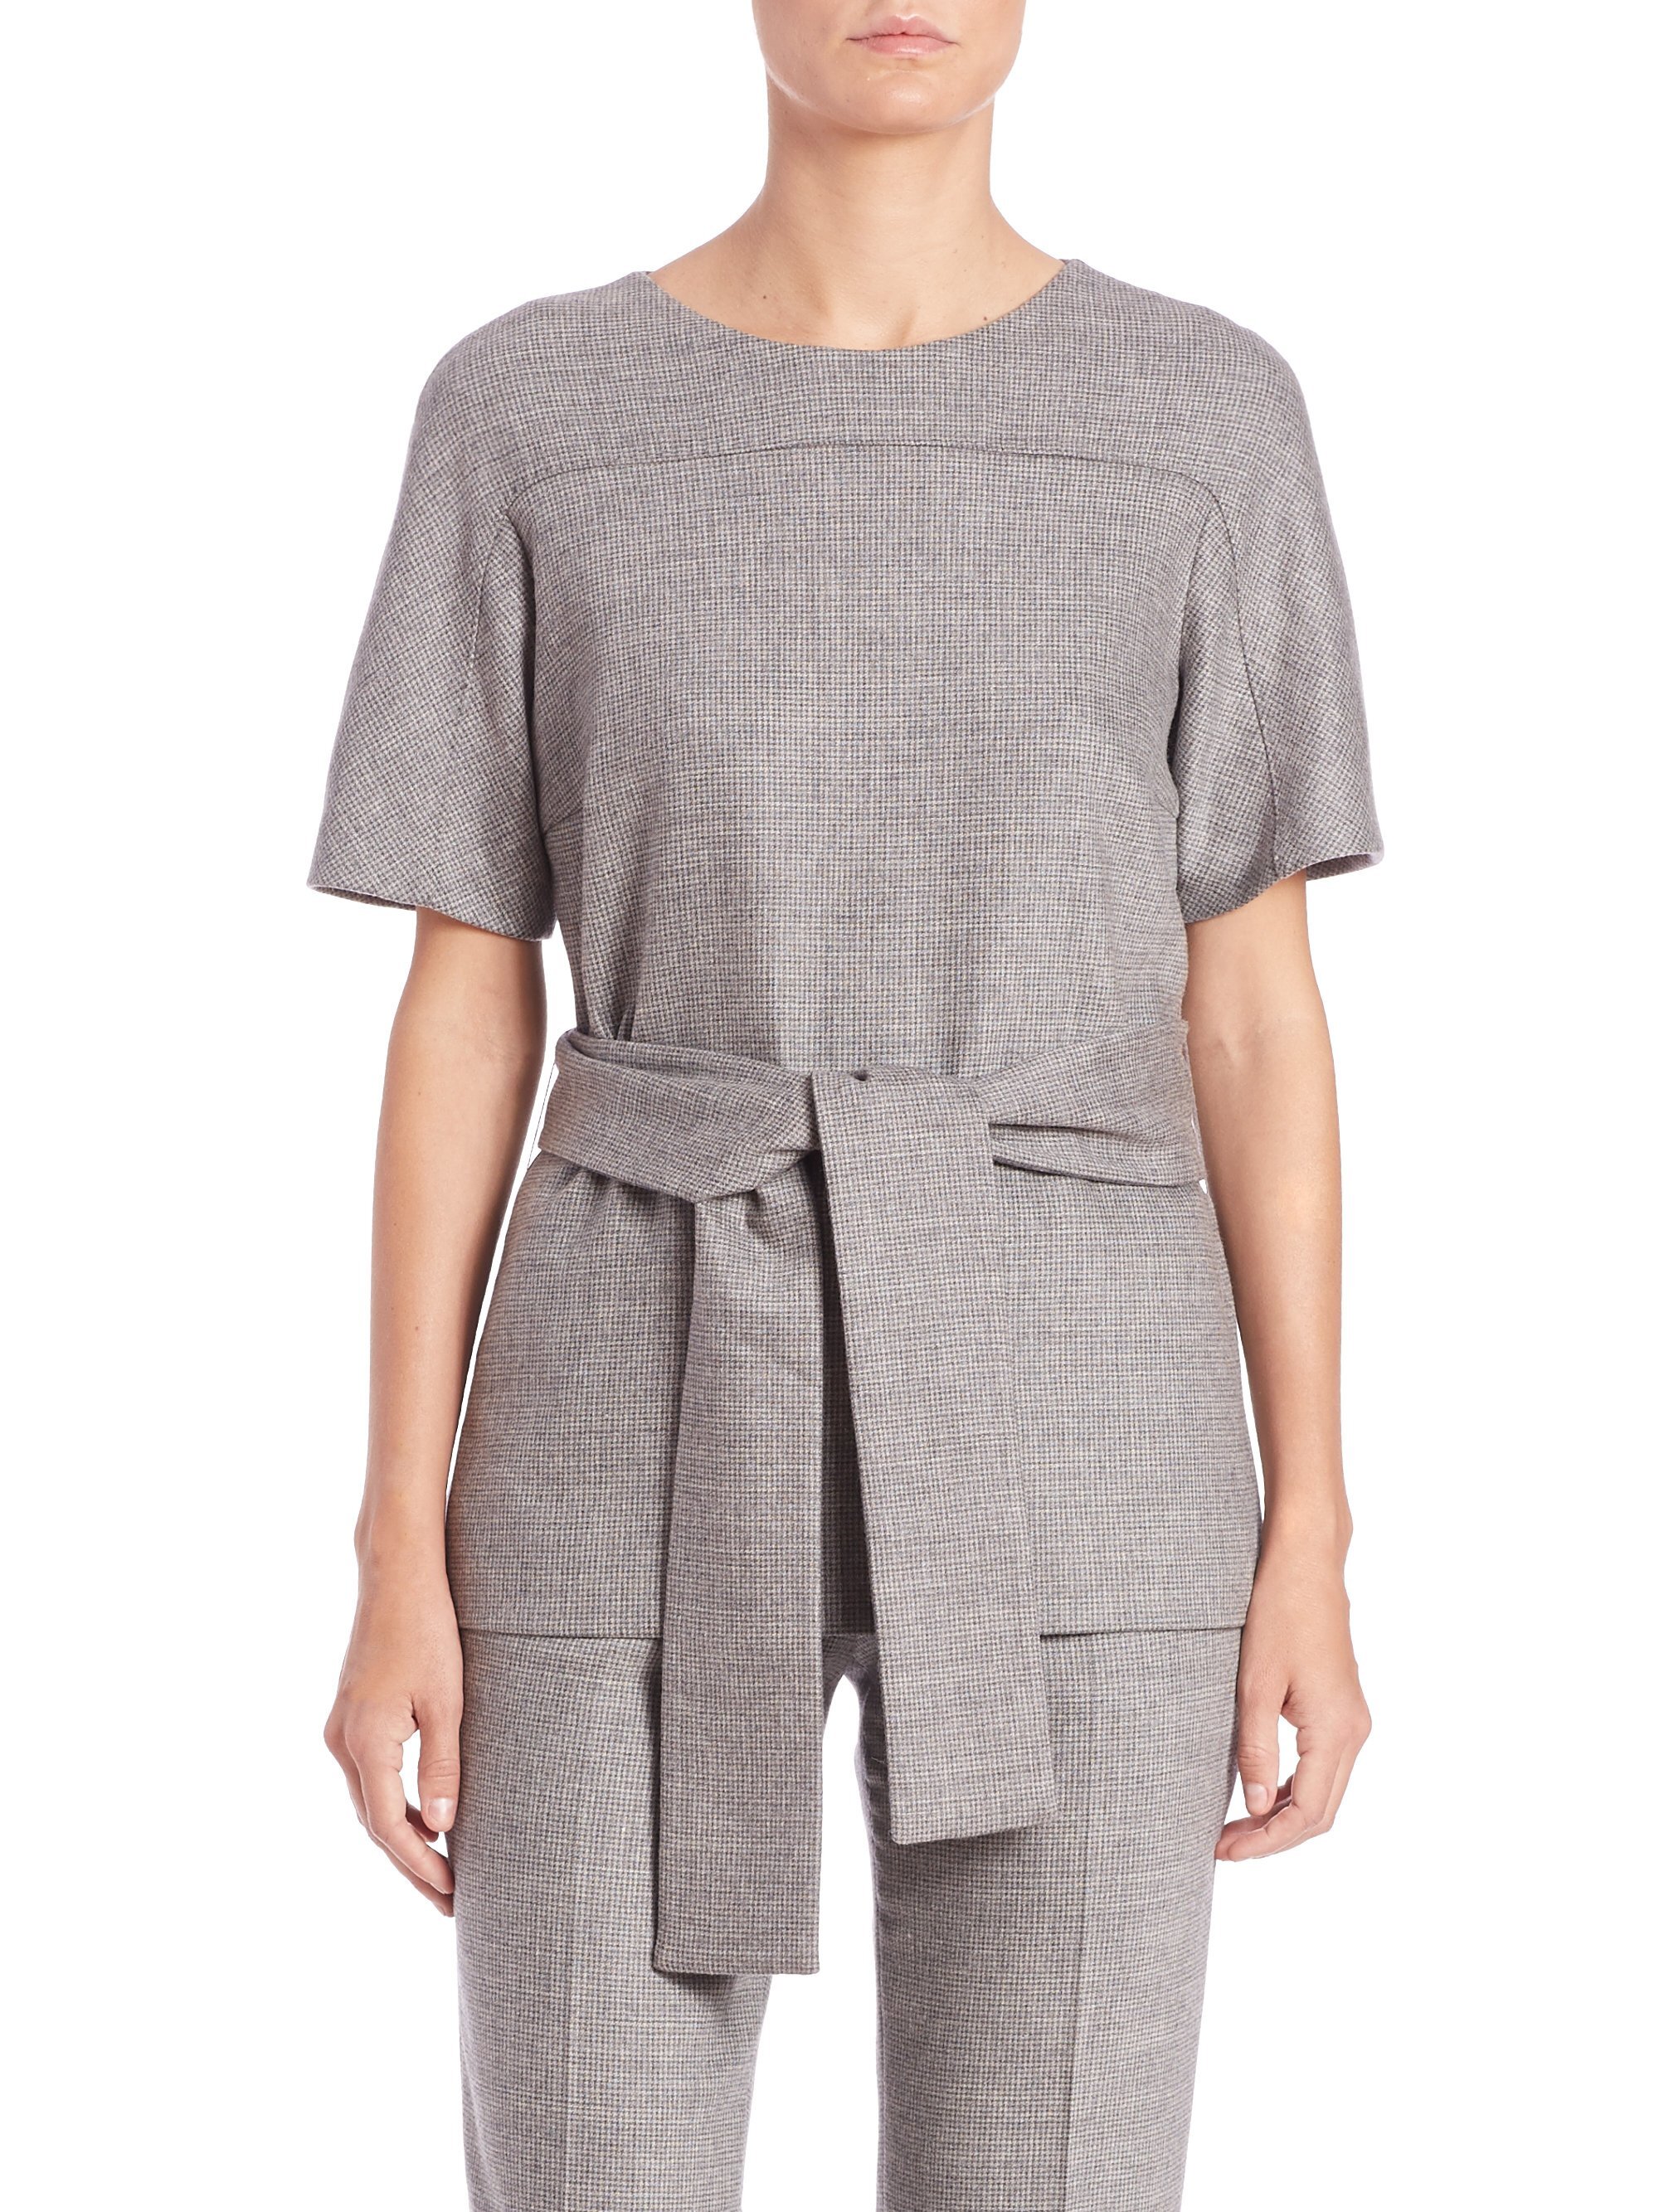 boss-grey-itoni-houndstooth-wool-cashmere-top-gray-product-0-405622666-normal.jpeg